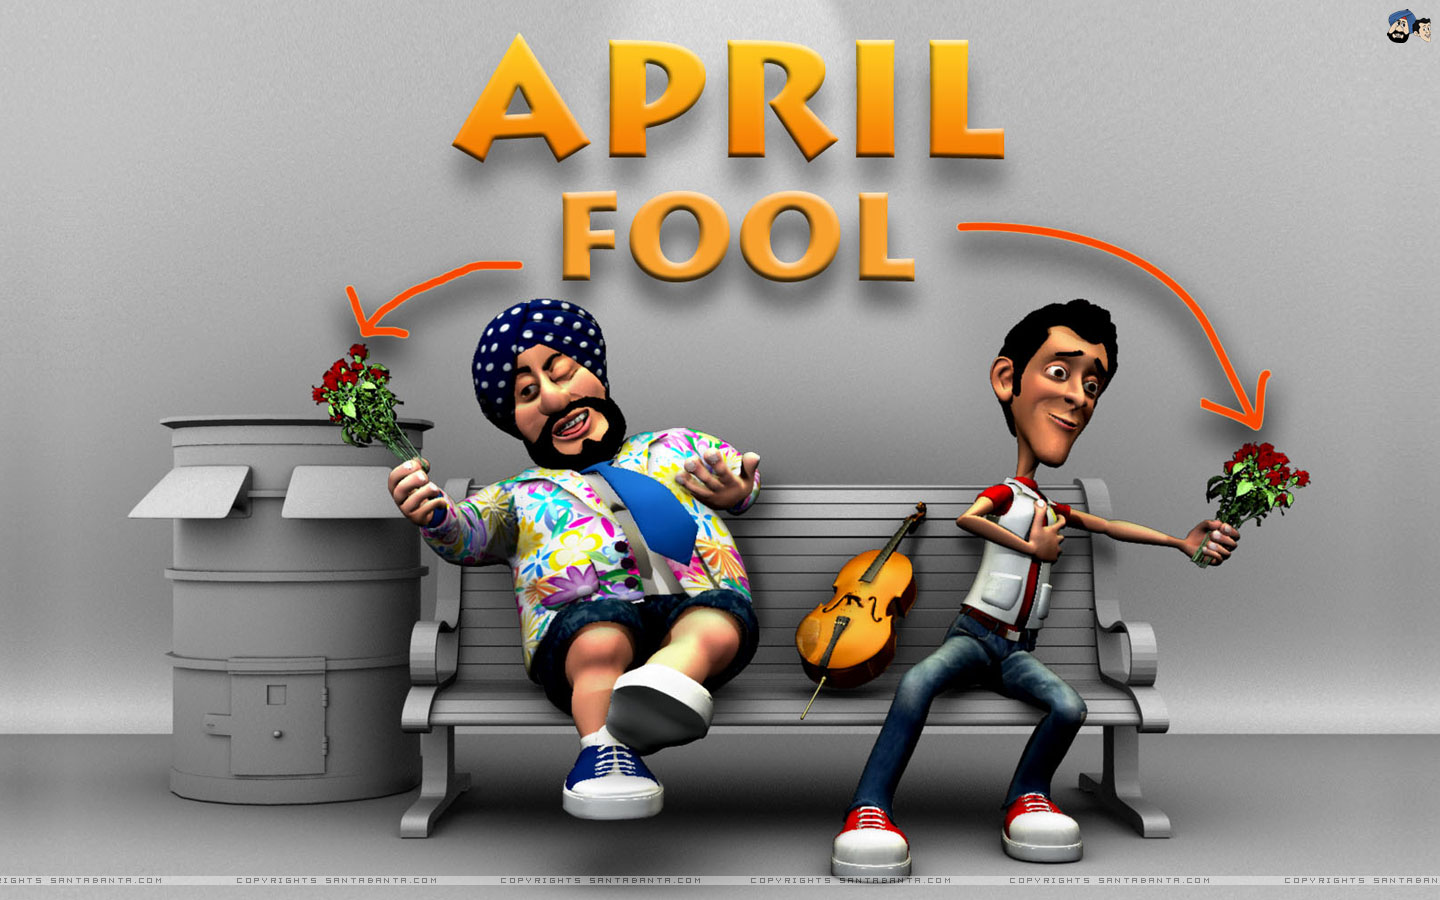 1st April Fool's Day Image